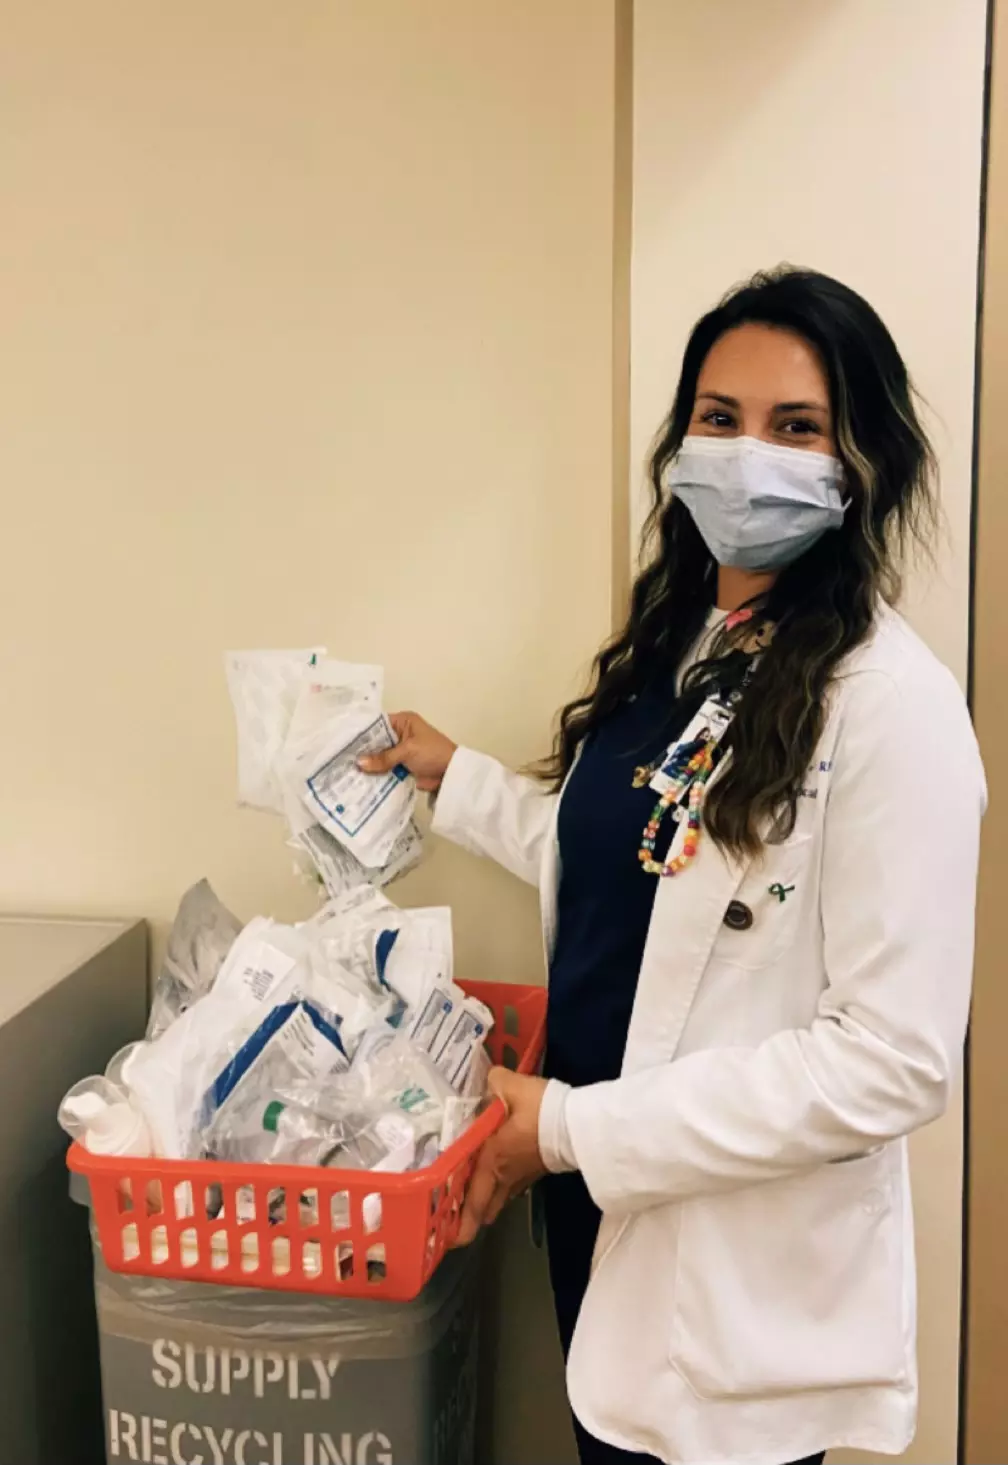 Cassandra Joseph, assistant nurse manager at AdventHealth Orlando holding recycled supplies